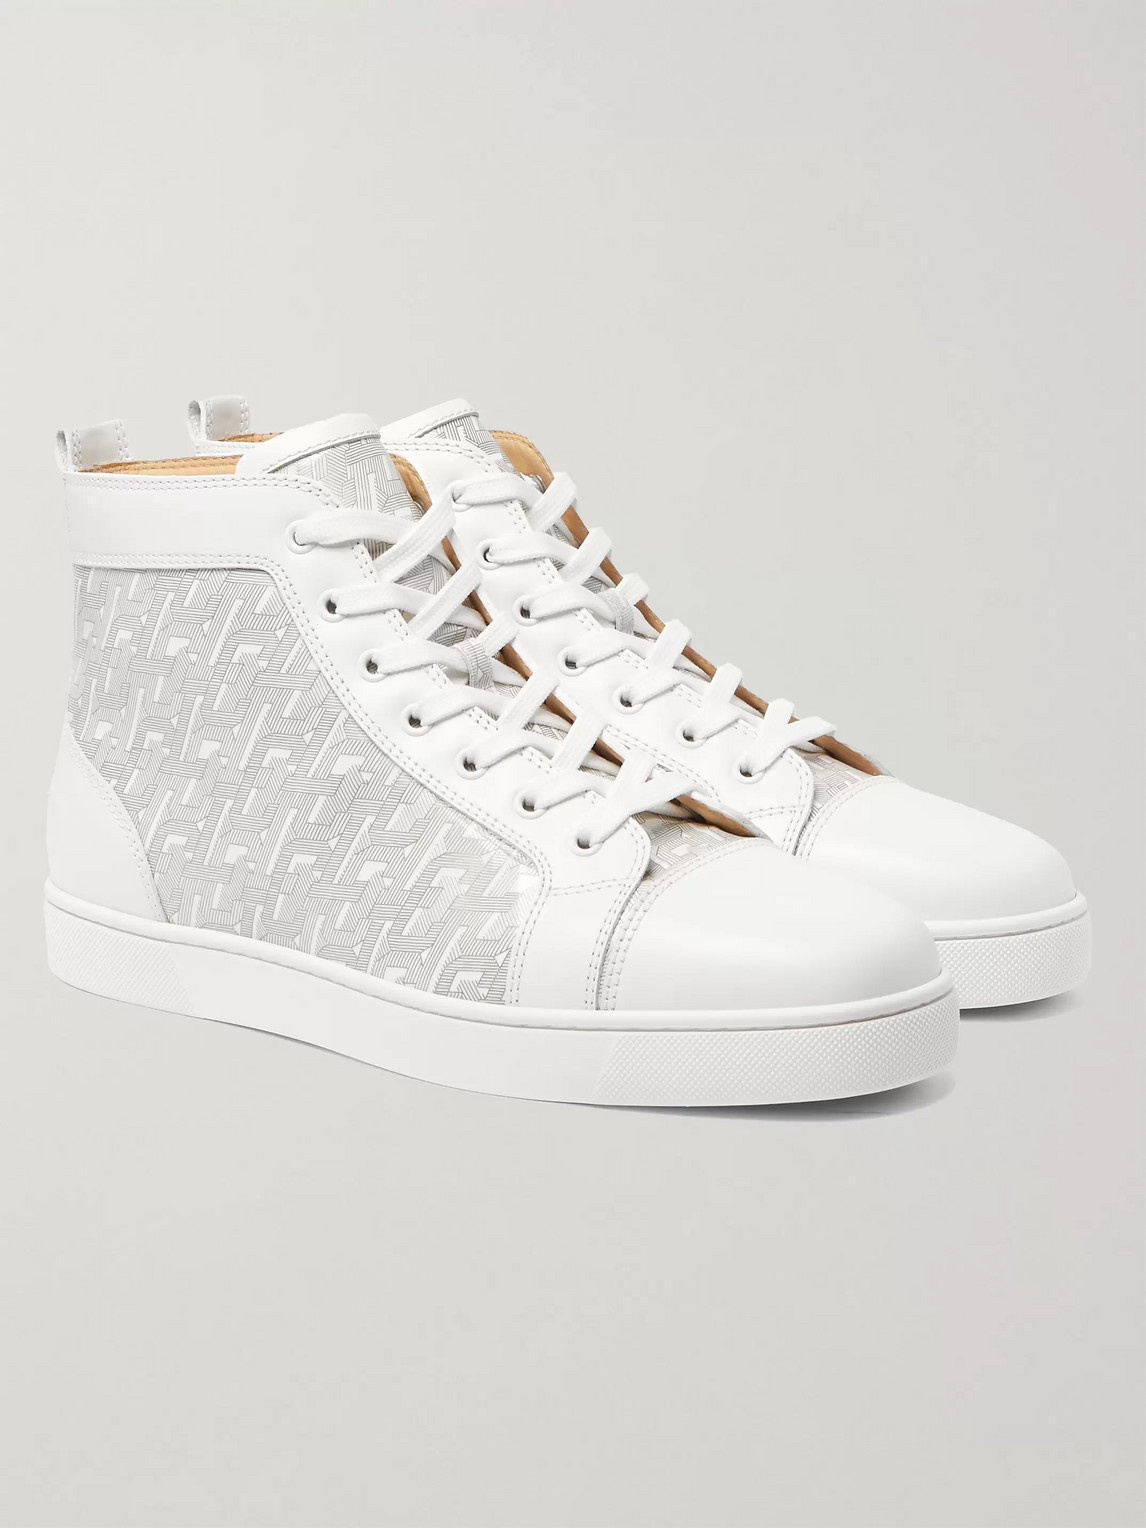 CHRISTIAN LOUBOUTIN LOUIS SMOOTH AND LOGO-PRINT PATENT-LEATHER HIGH-TOP SNEAKERS